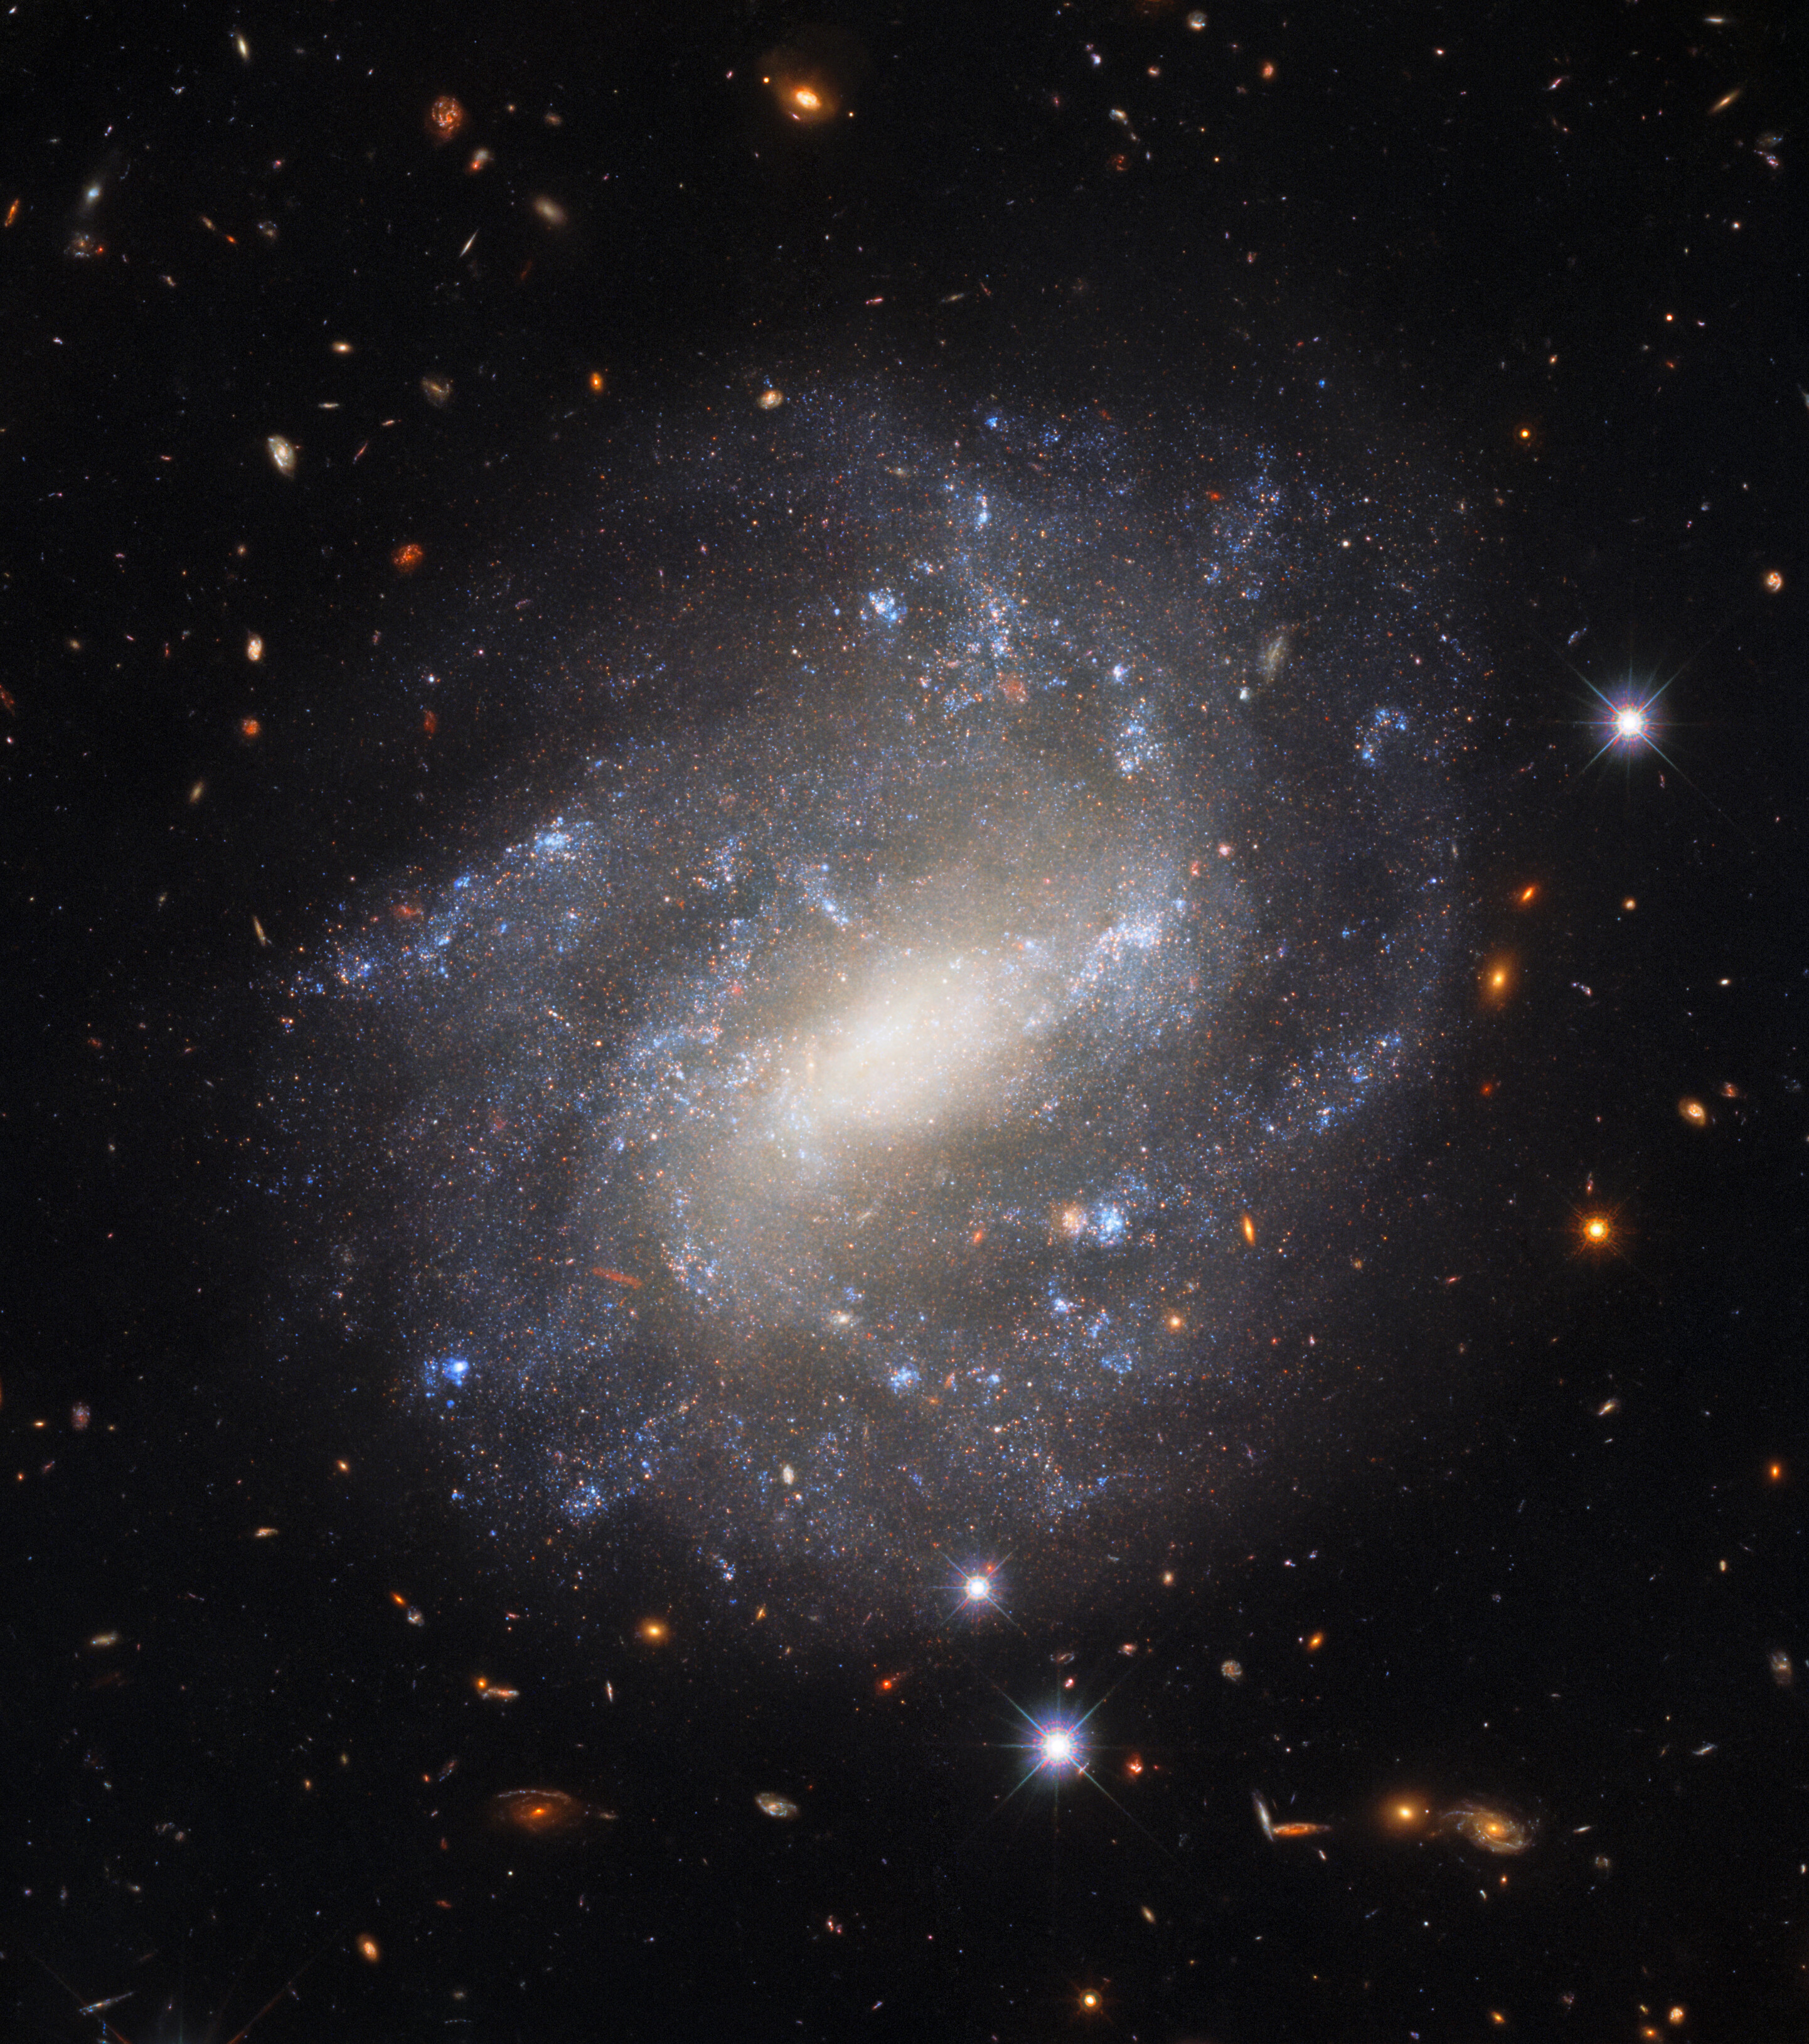 Galaxy helps astronomers measure the size of the universe